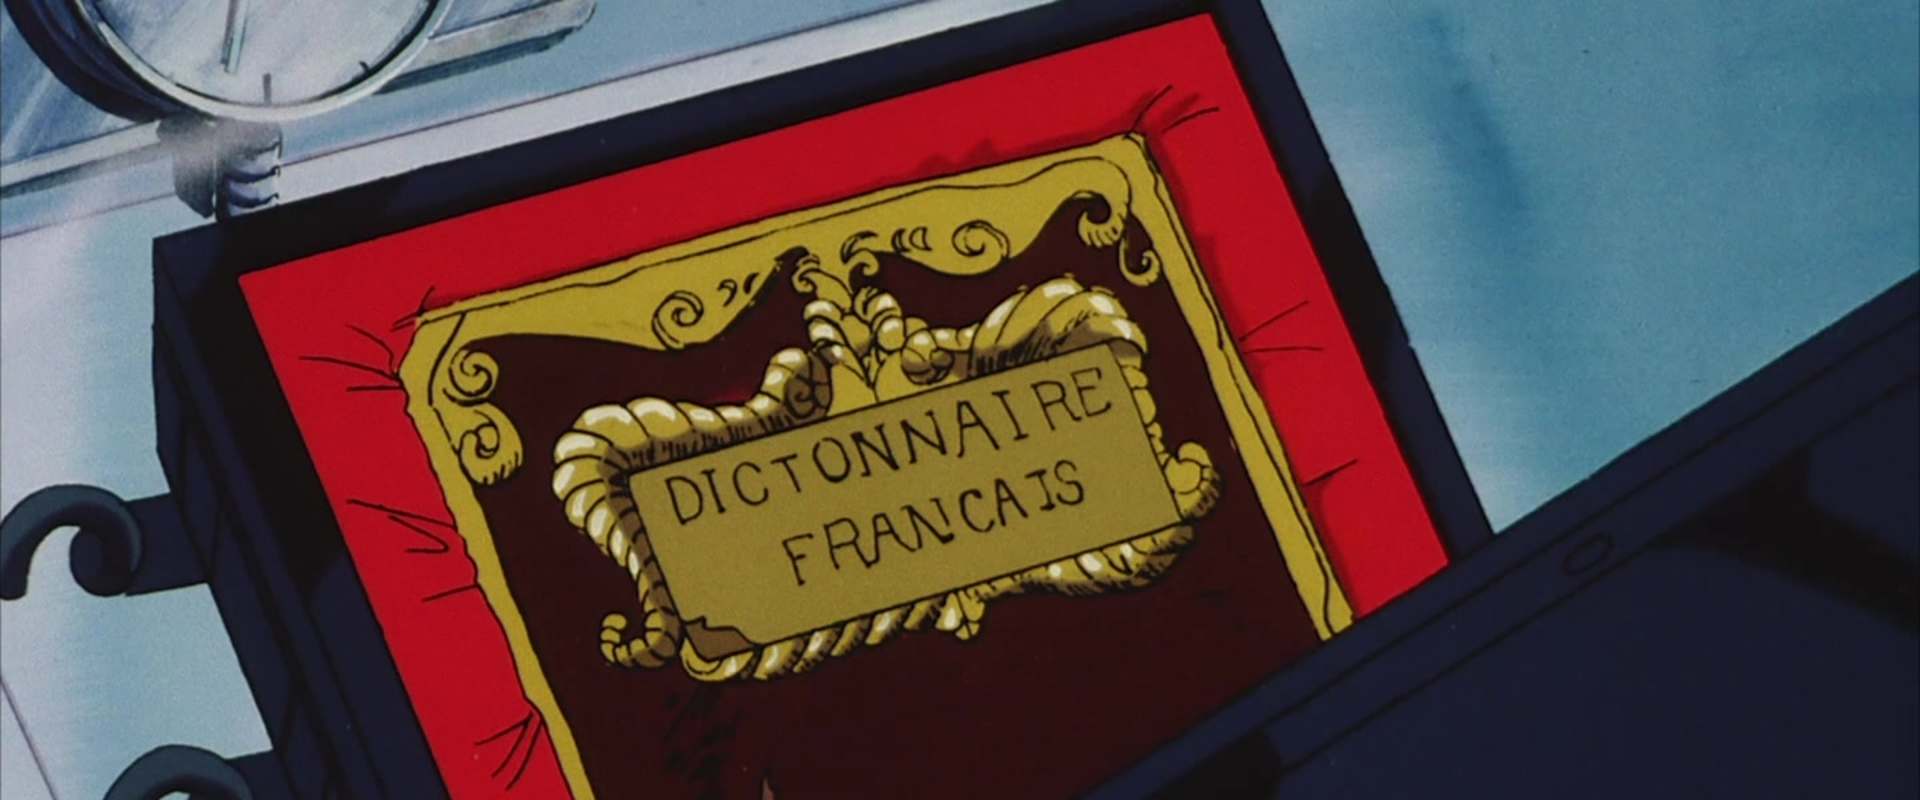 Lupin the Third: Napoleon's Dictionary background 1